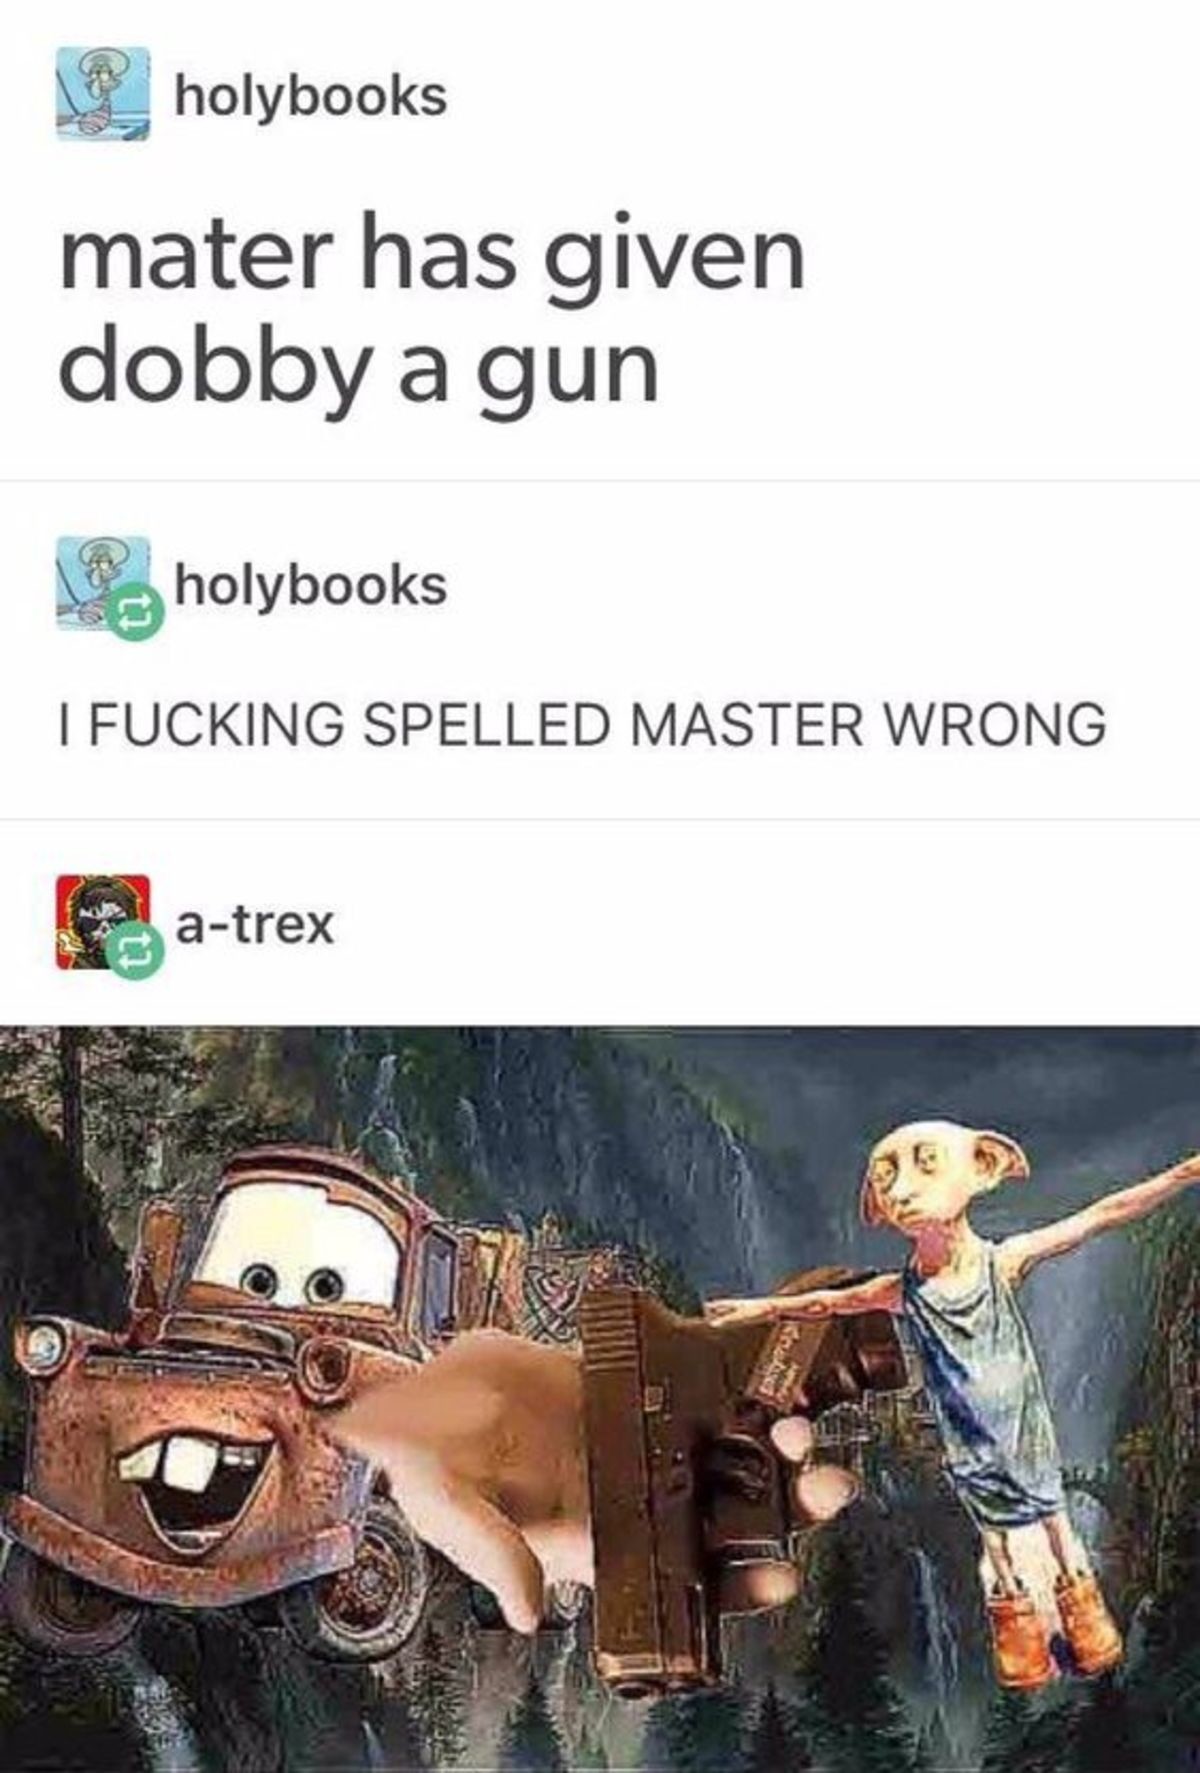 mater. .. OP missed the opportunity for &quot;Master has given Dobby a Glock&quot;